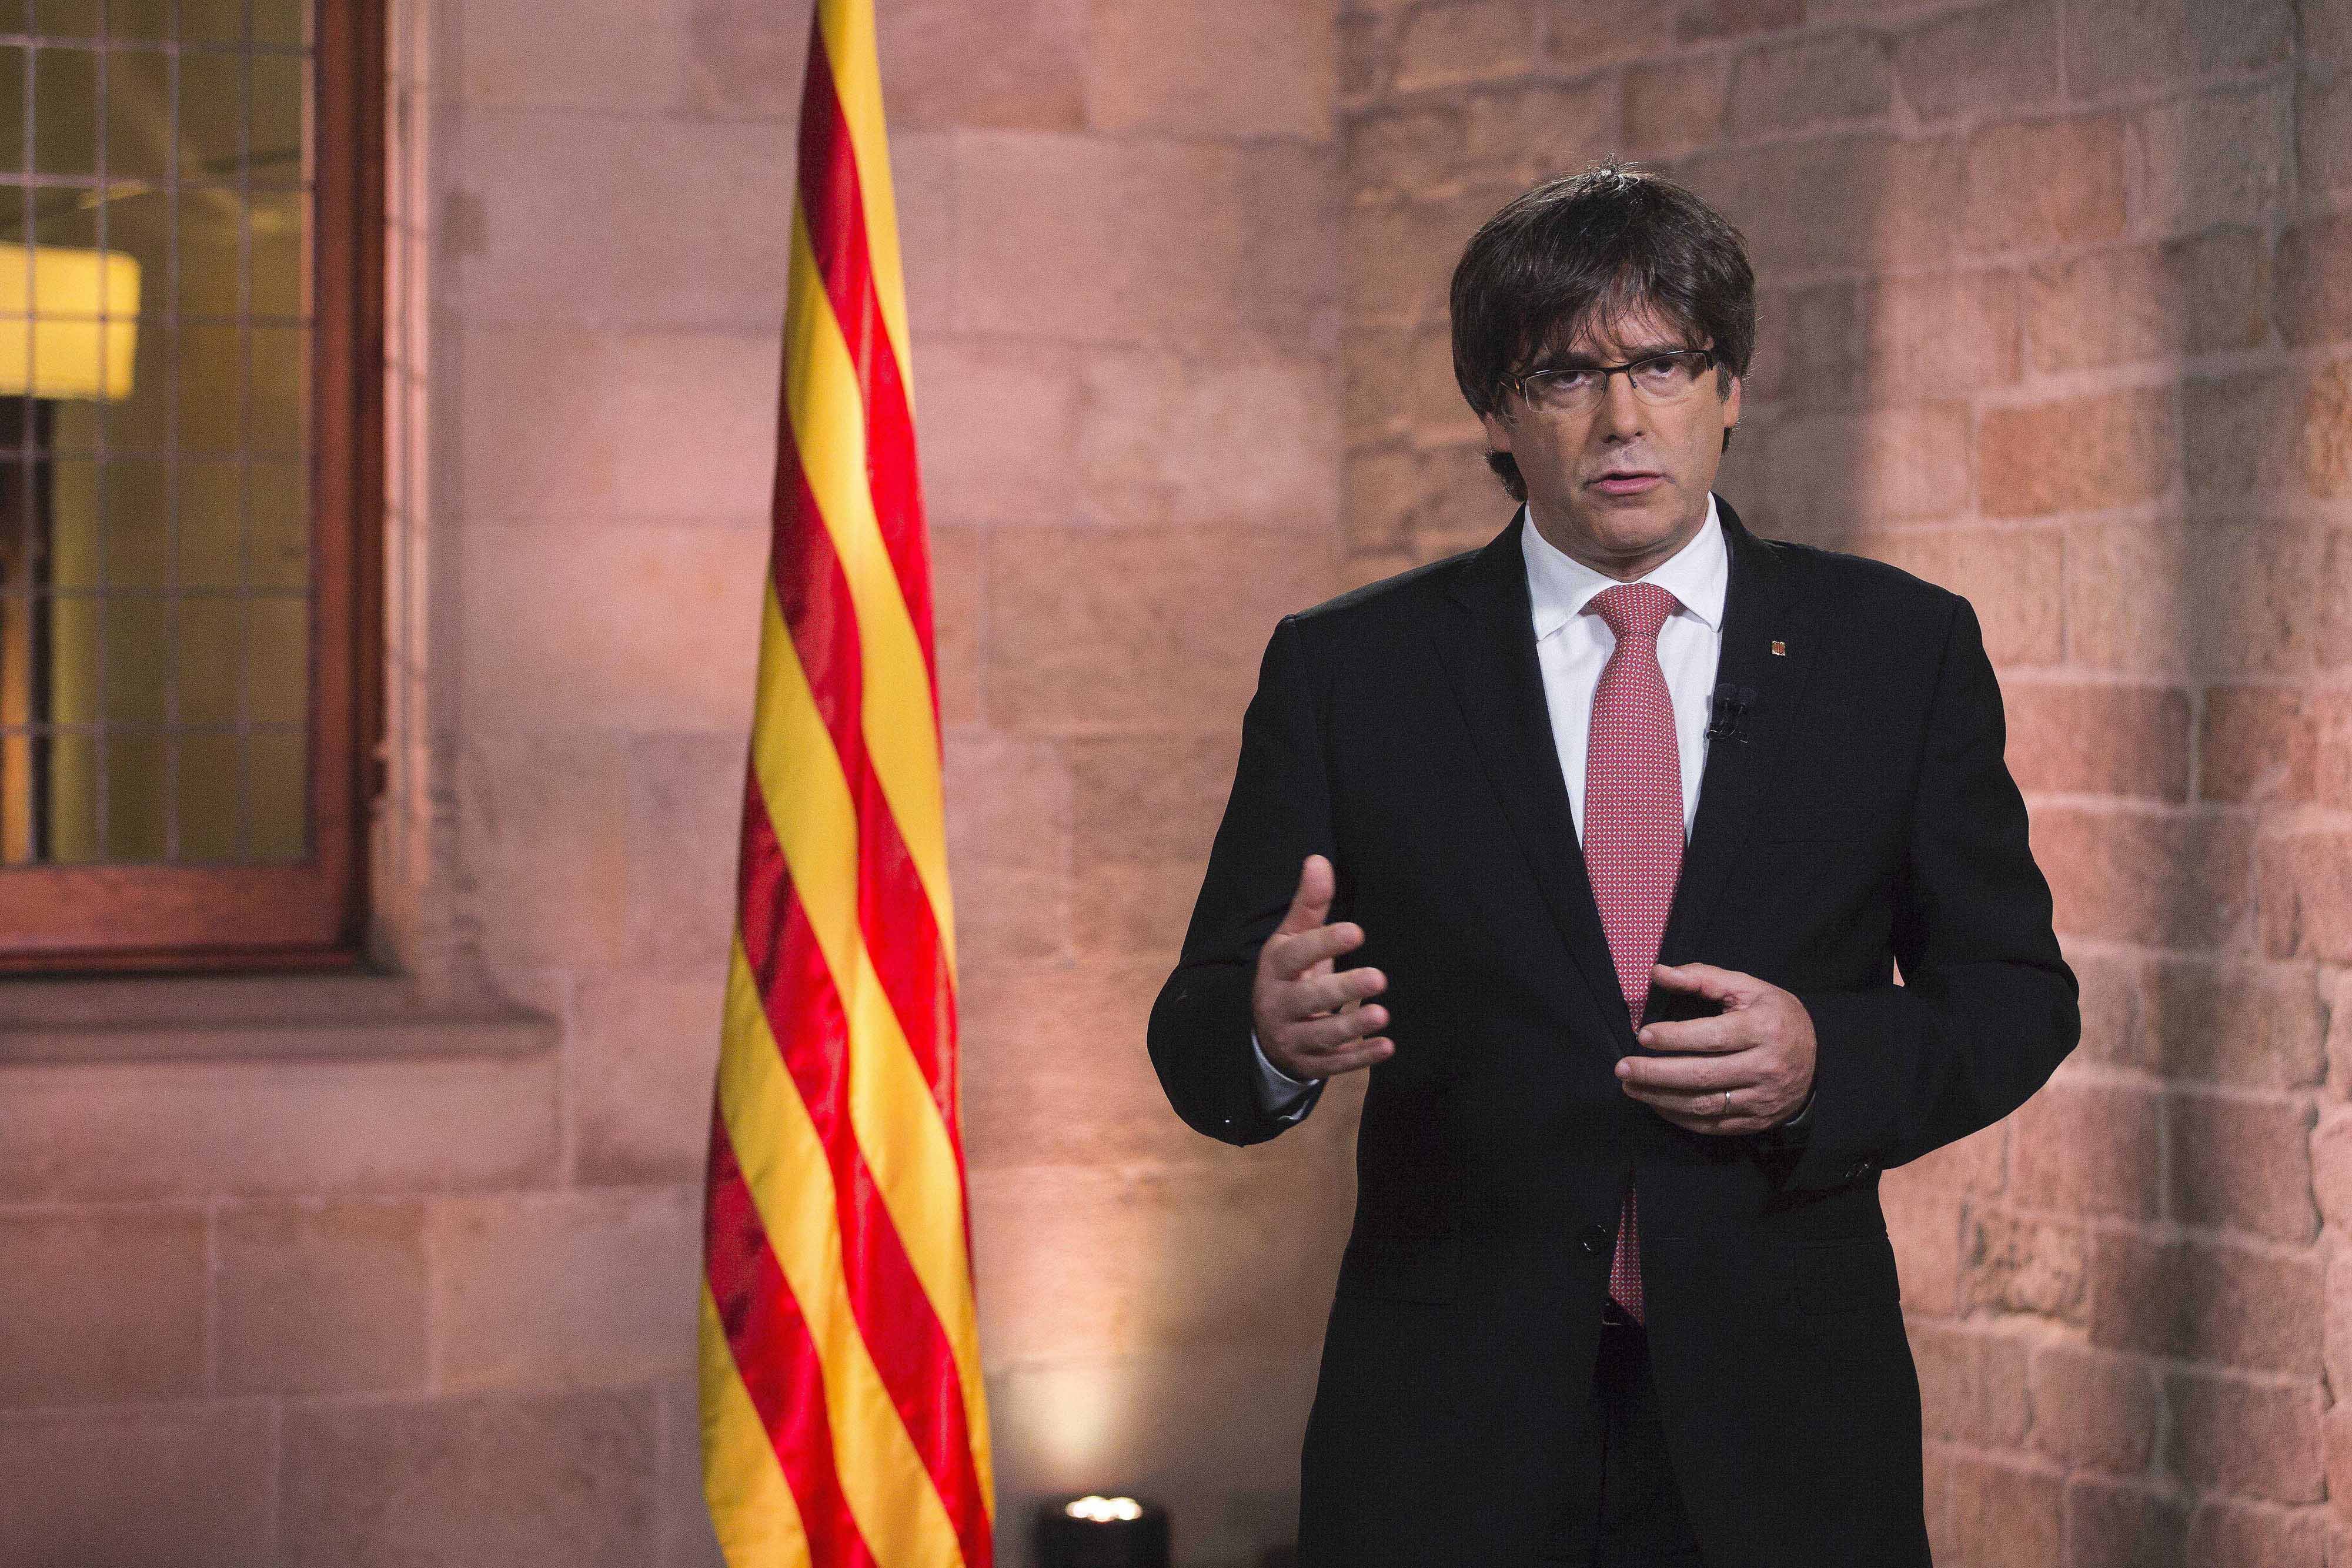 Catalan president Puigdemont: "The government already has everything ready for the referendum"